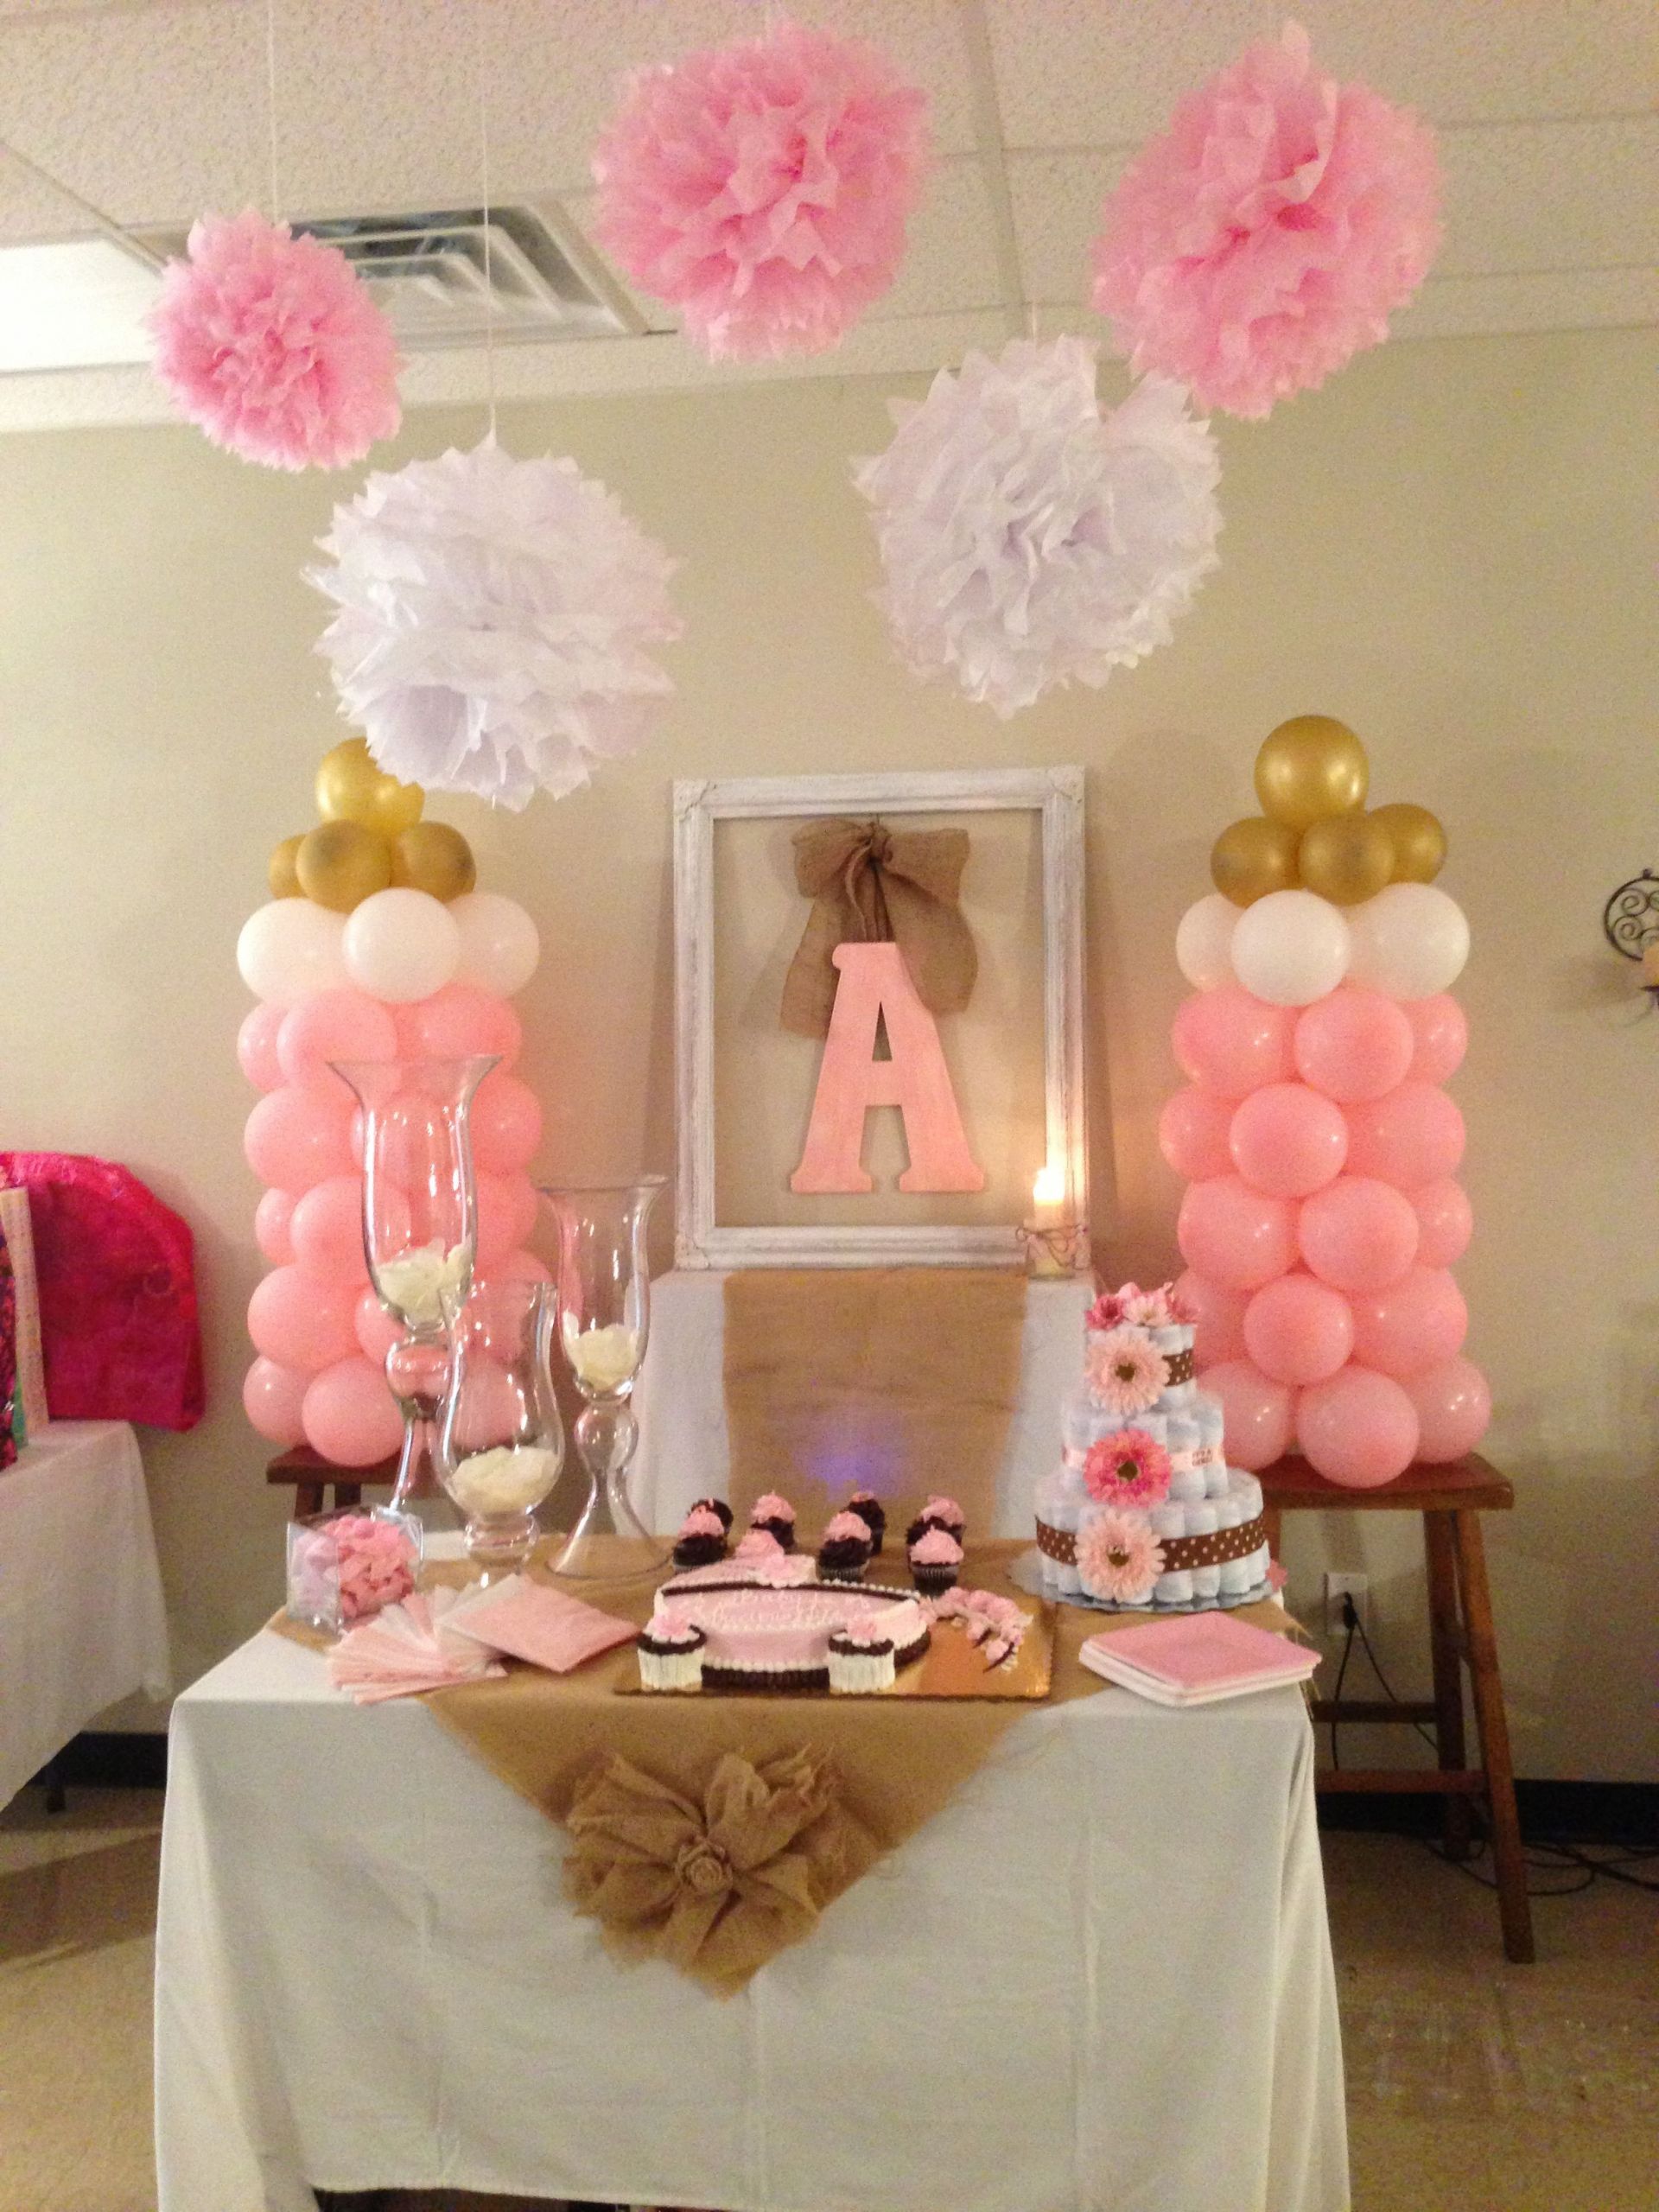 Decorating Ideas For Girl Baby Shower
 Girl baby shower decorations